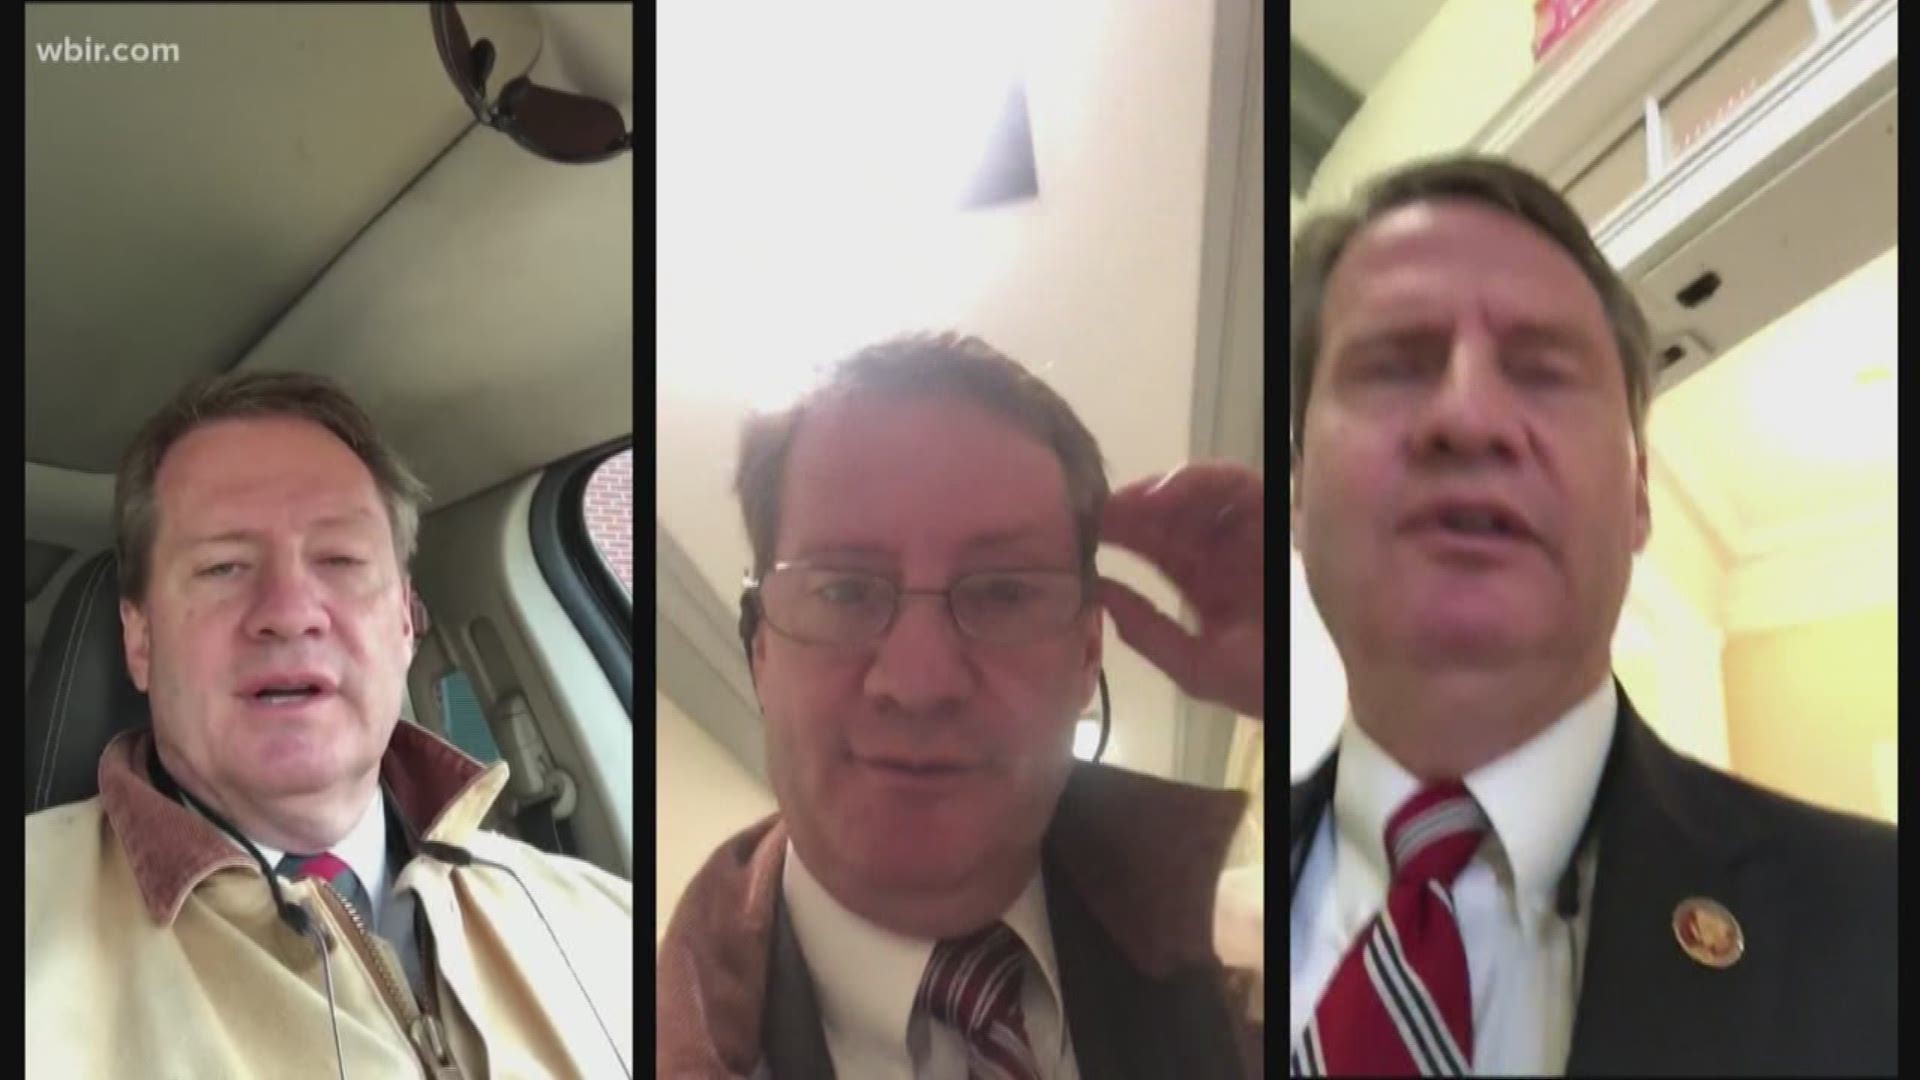 Congressman Tim Burchett is widely know for selfies and short video updates he posts to Twitter. And since taking office last month, his social posts are drawing more national media attention.